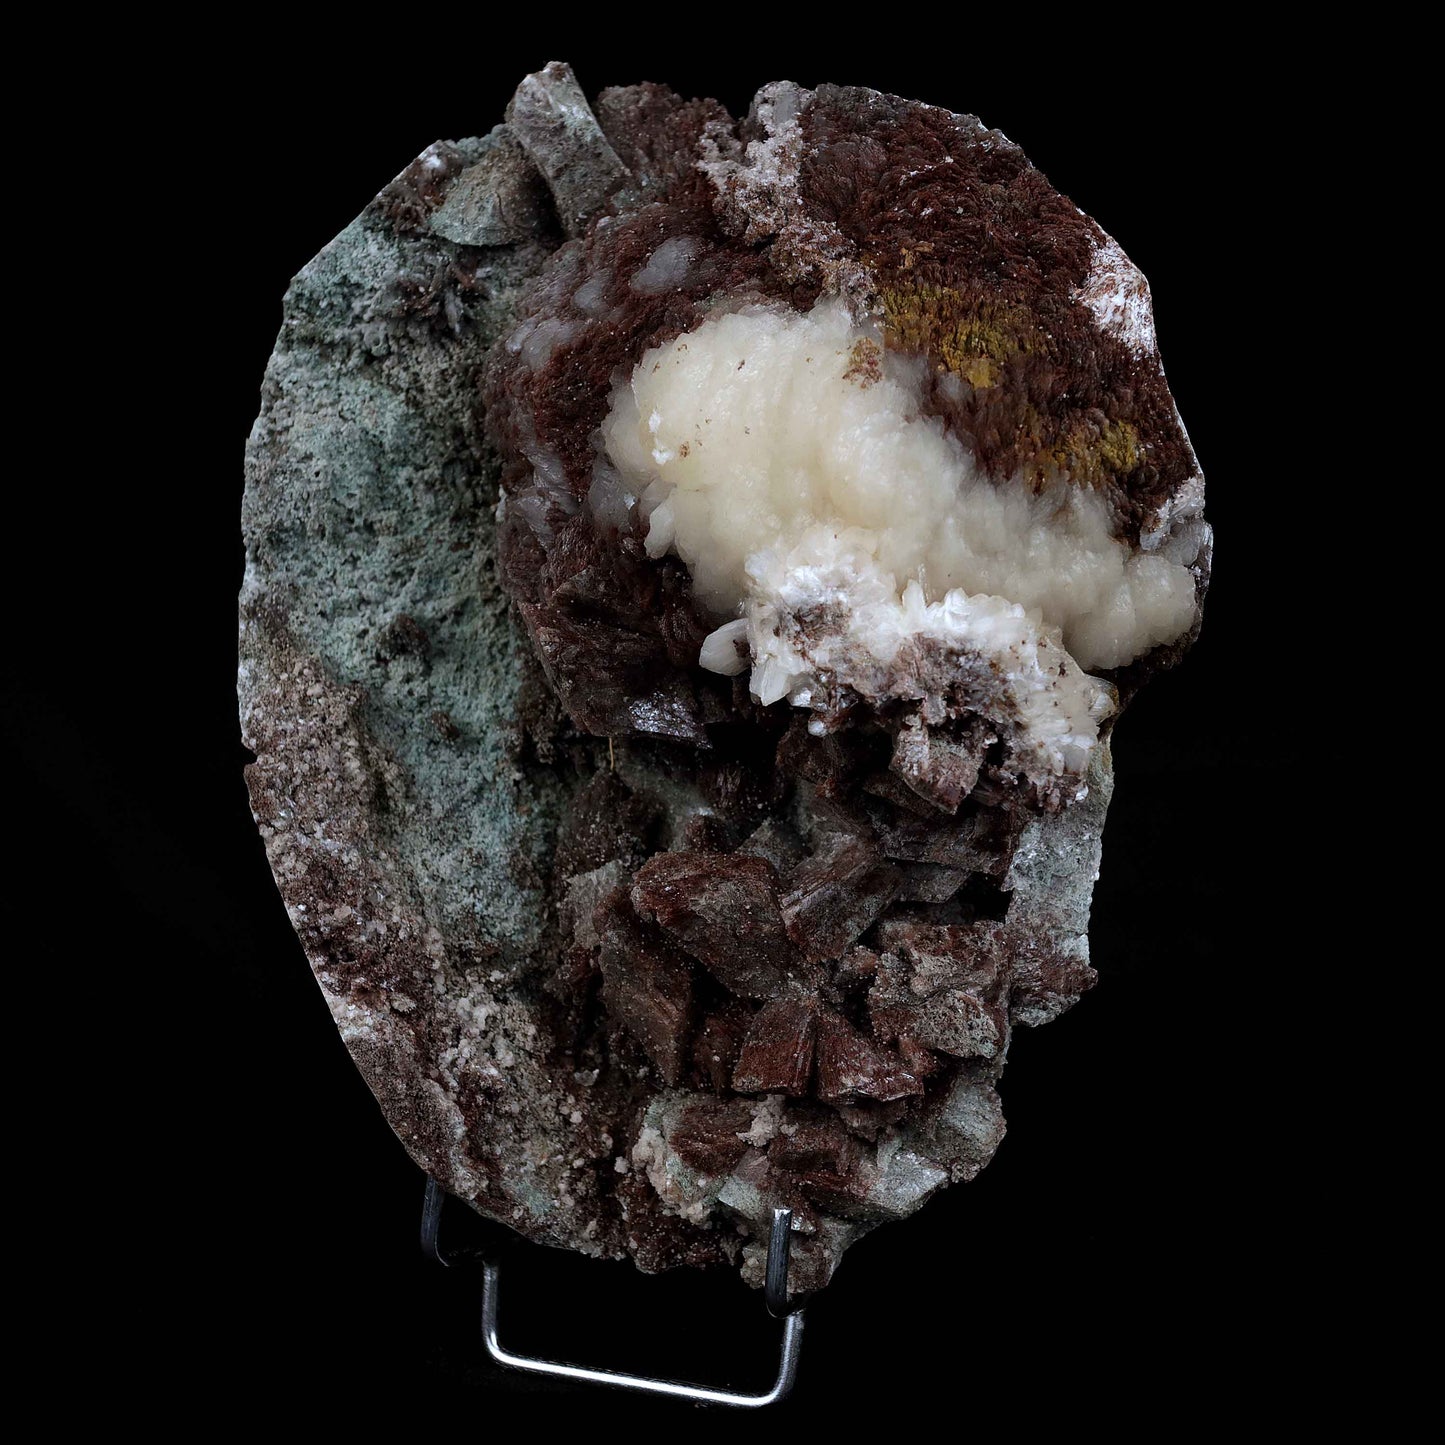 Stilbite Fuse with Marshy Green Heulandite Natural Mineral Specimen #…  https://www.superbminerals.us/products/stilbite-fuse-with-marshy-green-heulandite-natural-mineral-specimen-b-4653  Features: It has become a standard to include Heulandite in a Chalcedony collection, and this tiny crystal is extremely attractive in and of itself. The specimen is dominated by a large number of dazzling crystals with outstanding luster, good translucence, and a pleasant sea-green hue. Stilbite